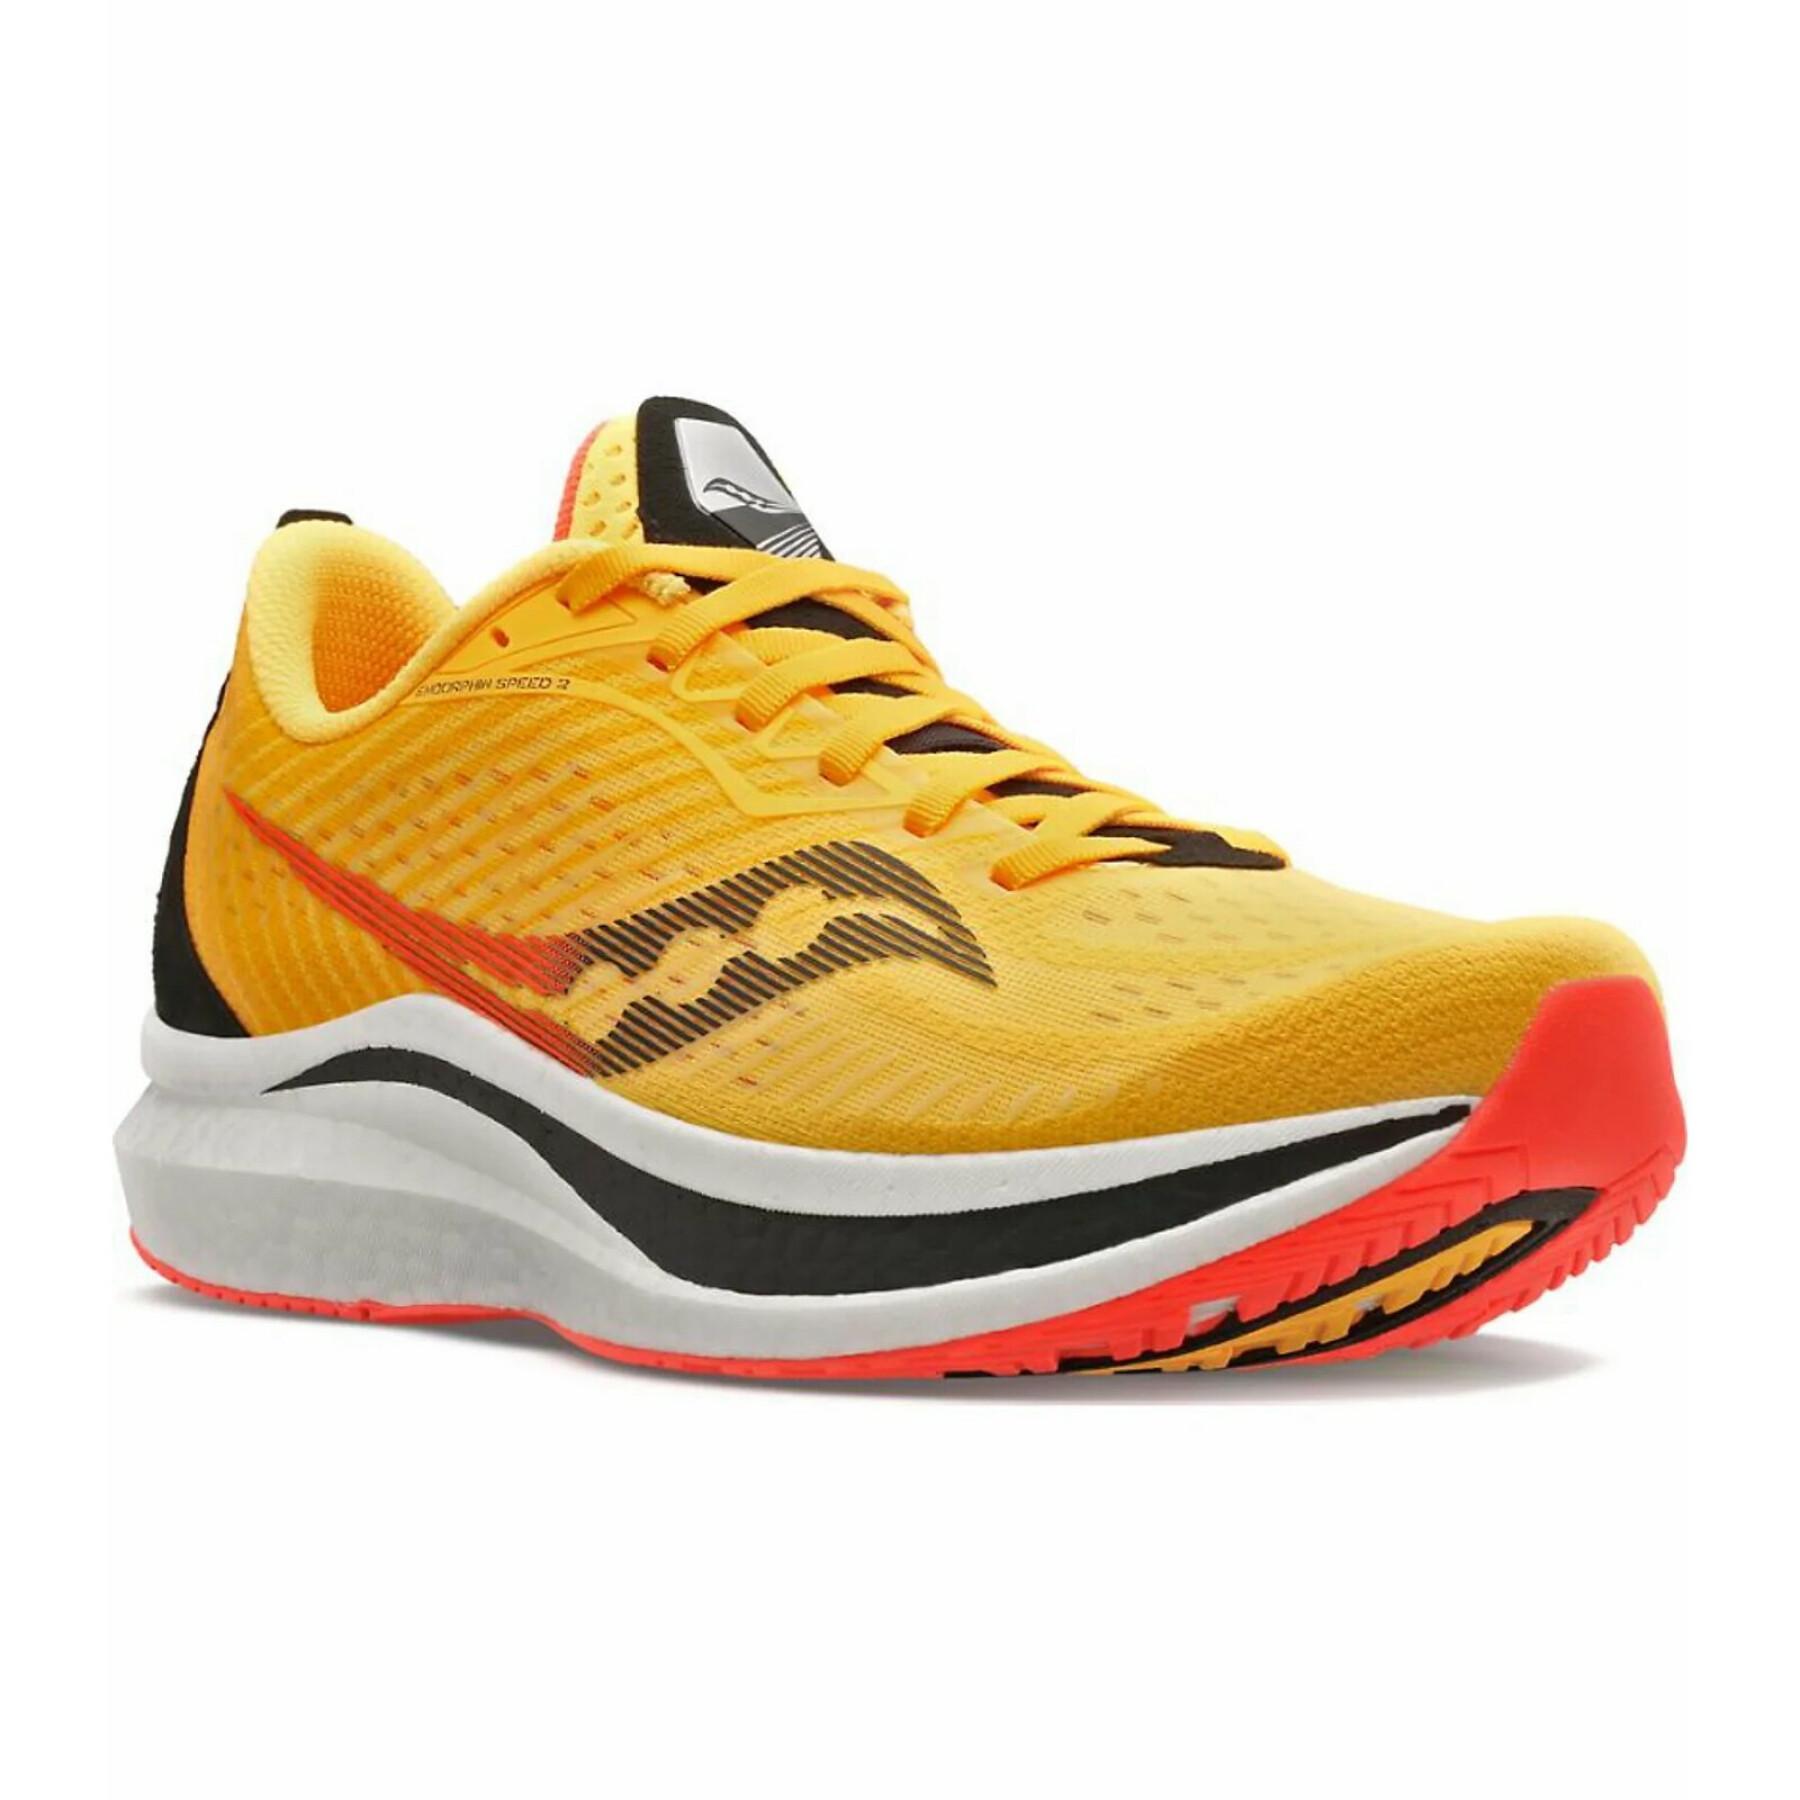 Running shoes Saucony Endorphin Speed 2